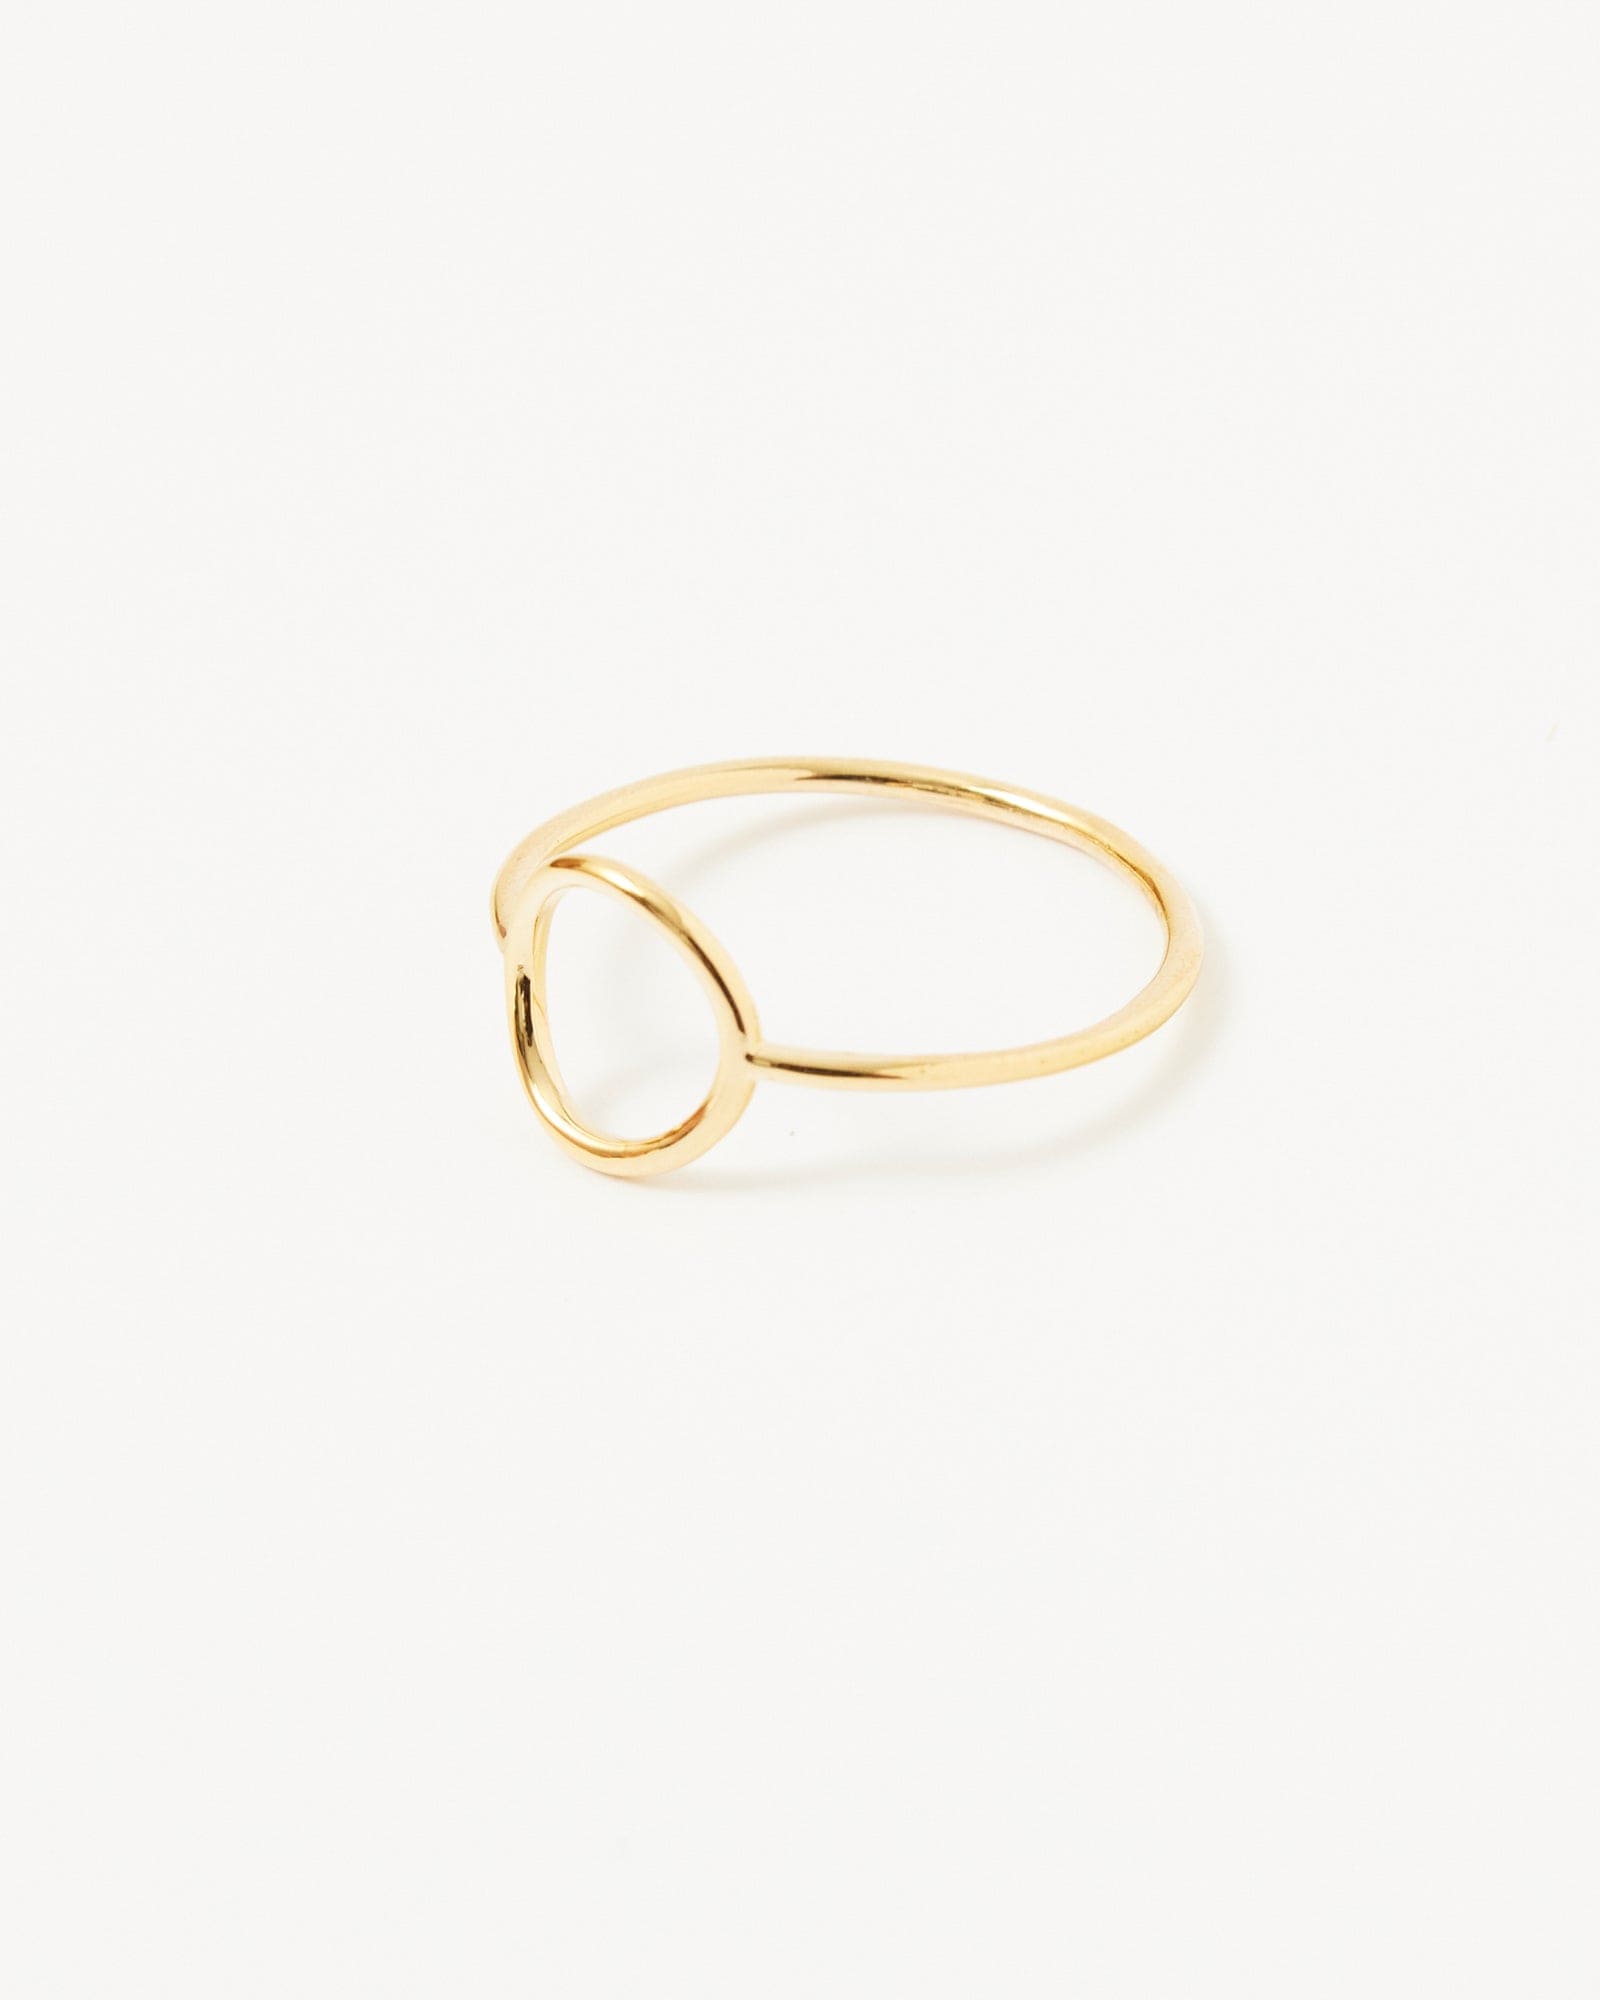 Gold ring with circle design